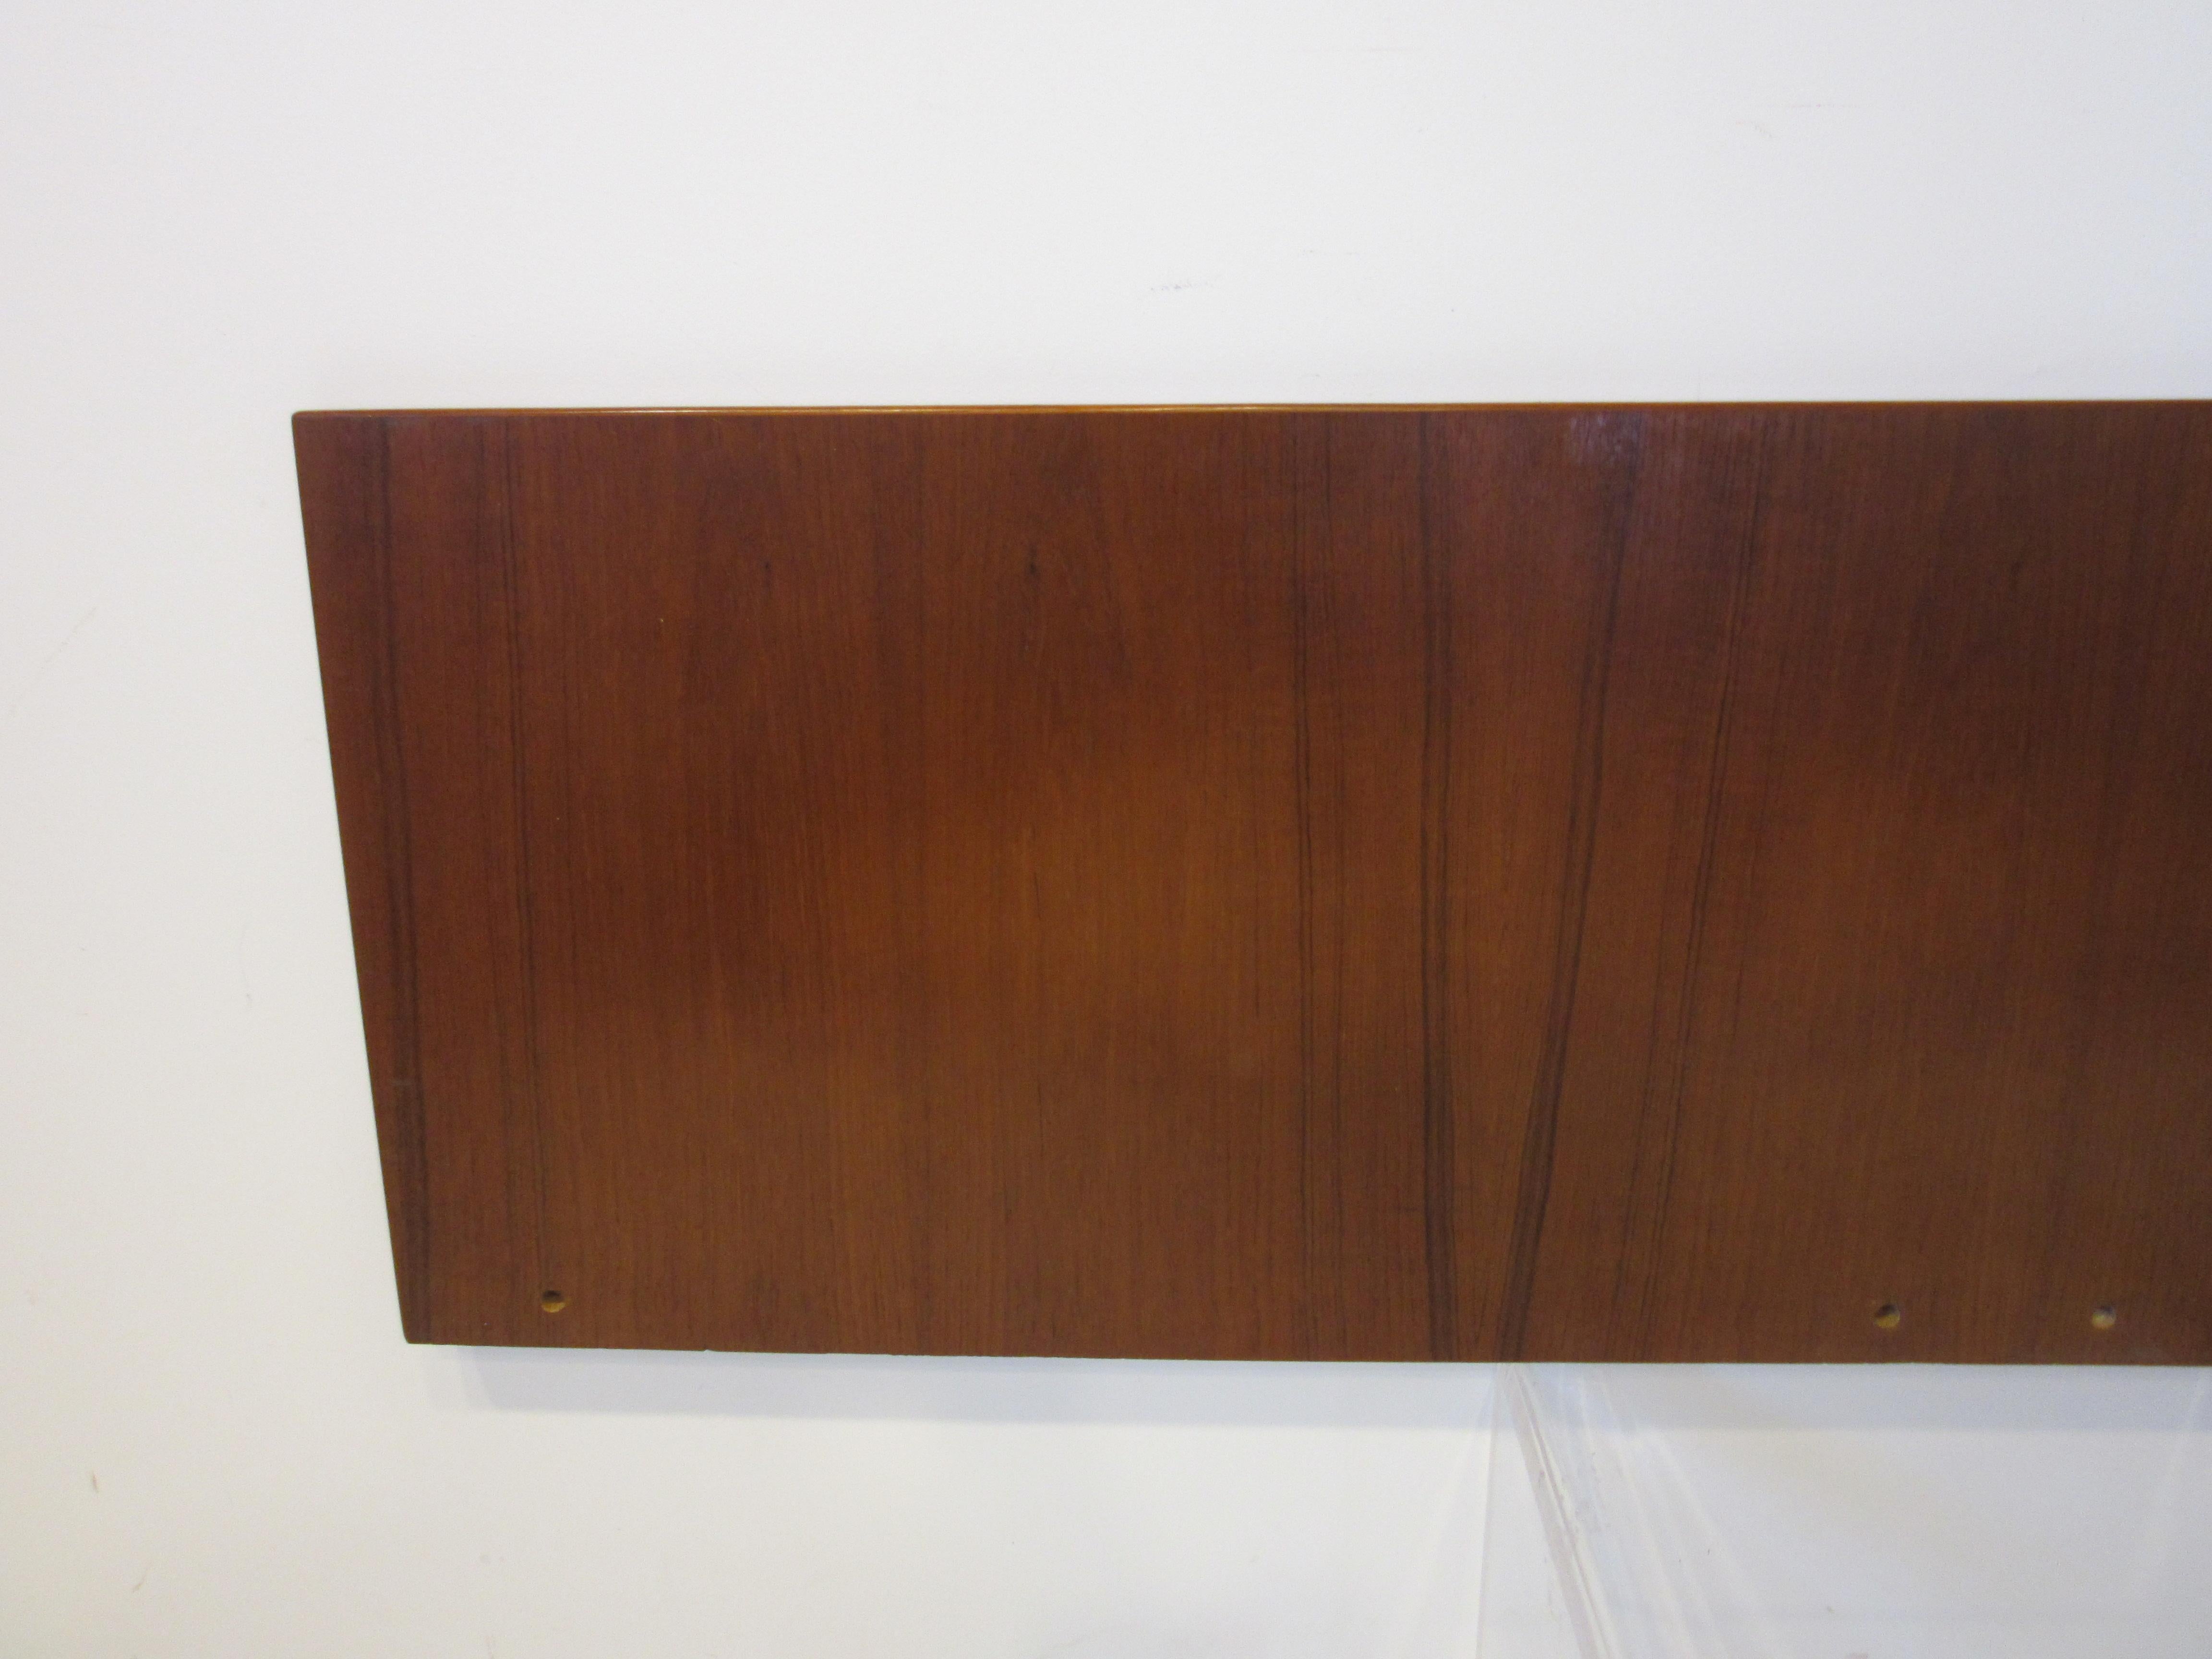 A wall mounted teak wood queen sized headboard with finished edges and a simple profile, branded to the back manufactured by GETAMA Gedsted Denmark Designed by Hans Wegner . There is no mounting hardware included you or your carpenter would have to